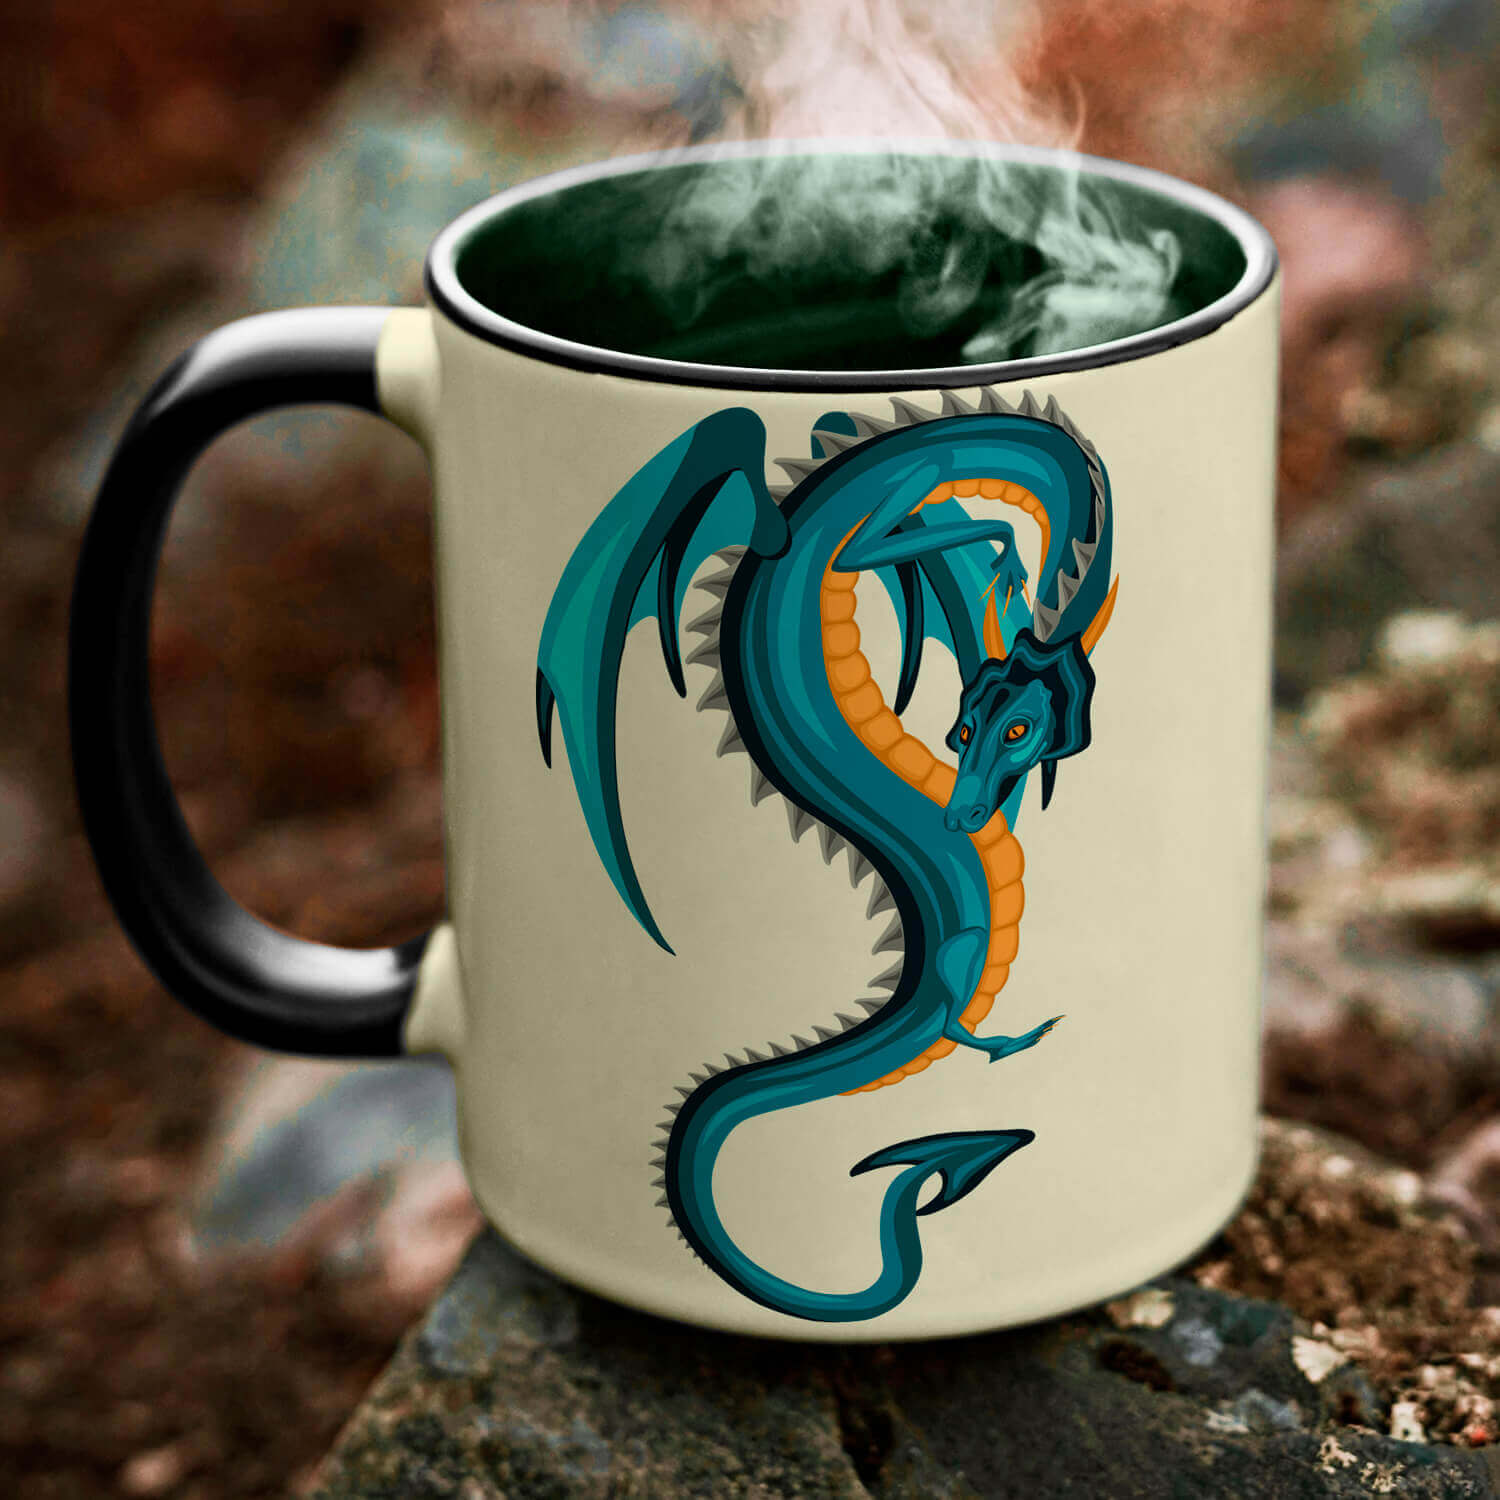 Coffee mug with a dragon painted on it.